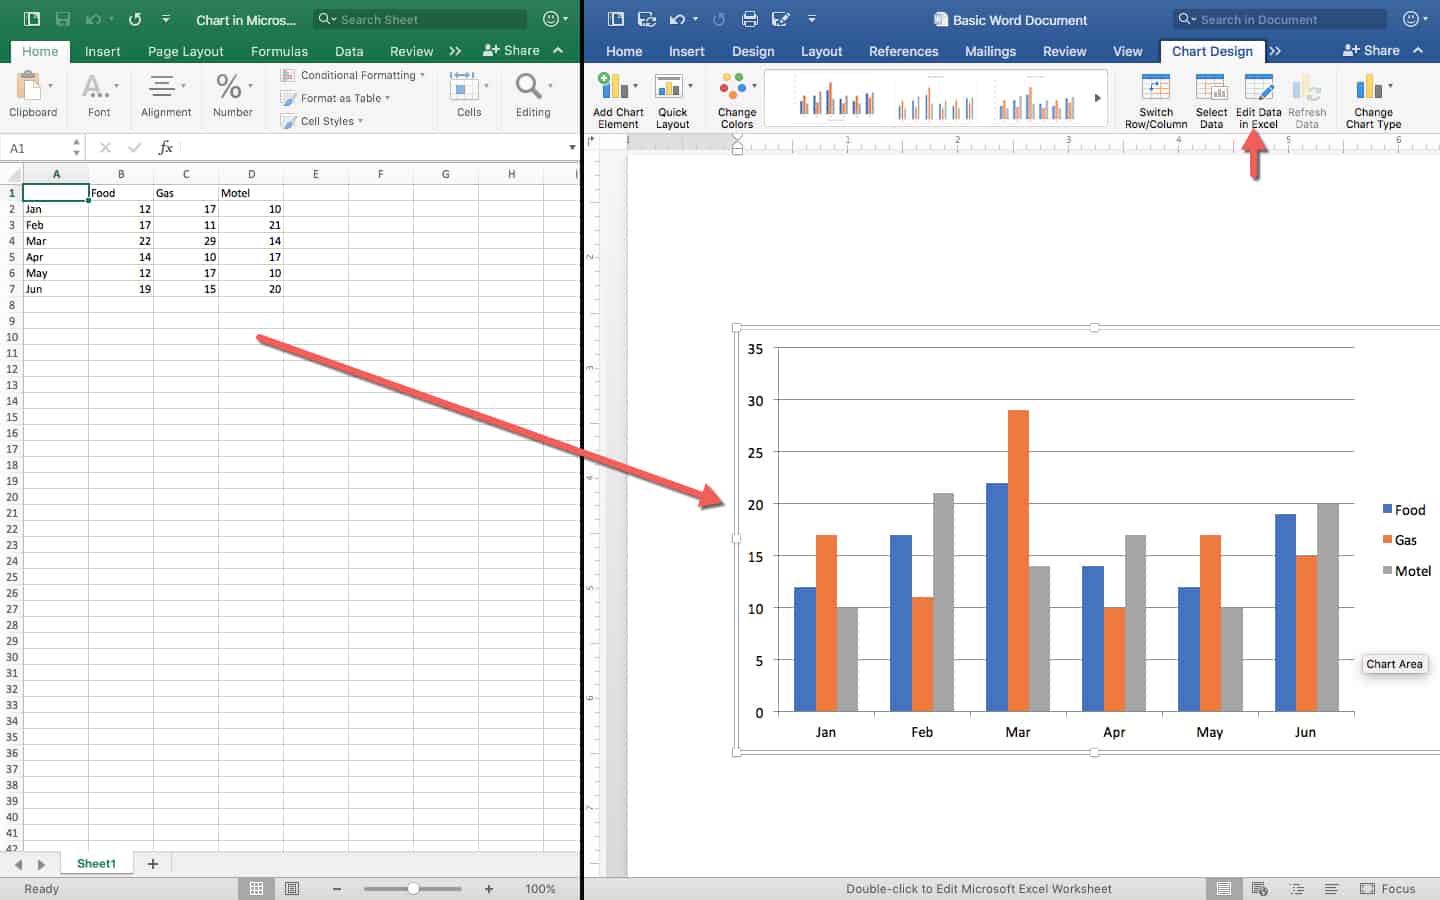 MS Excel 2003: Draw a line through a value in a cell (strikethrough)